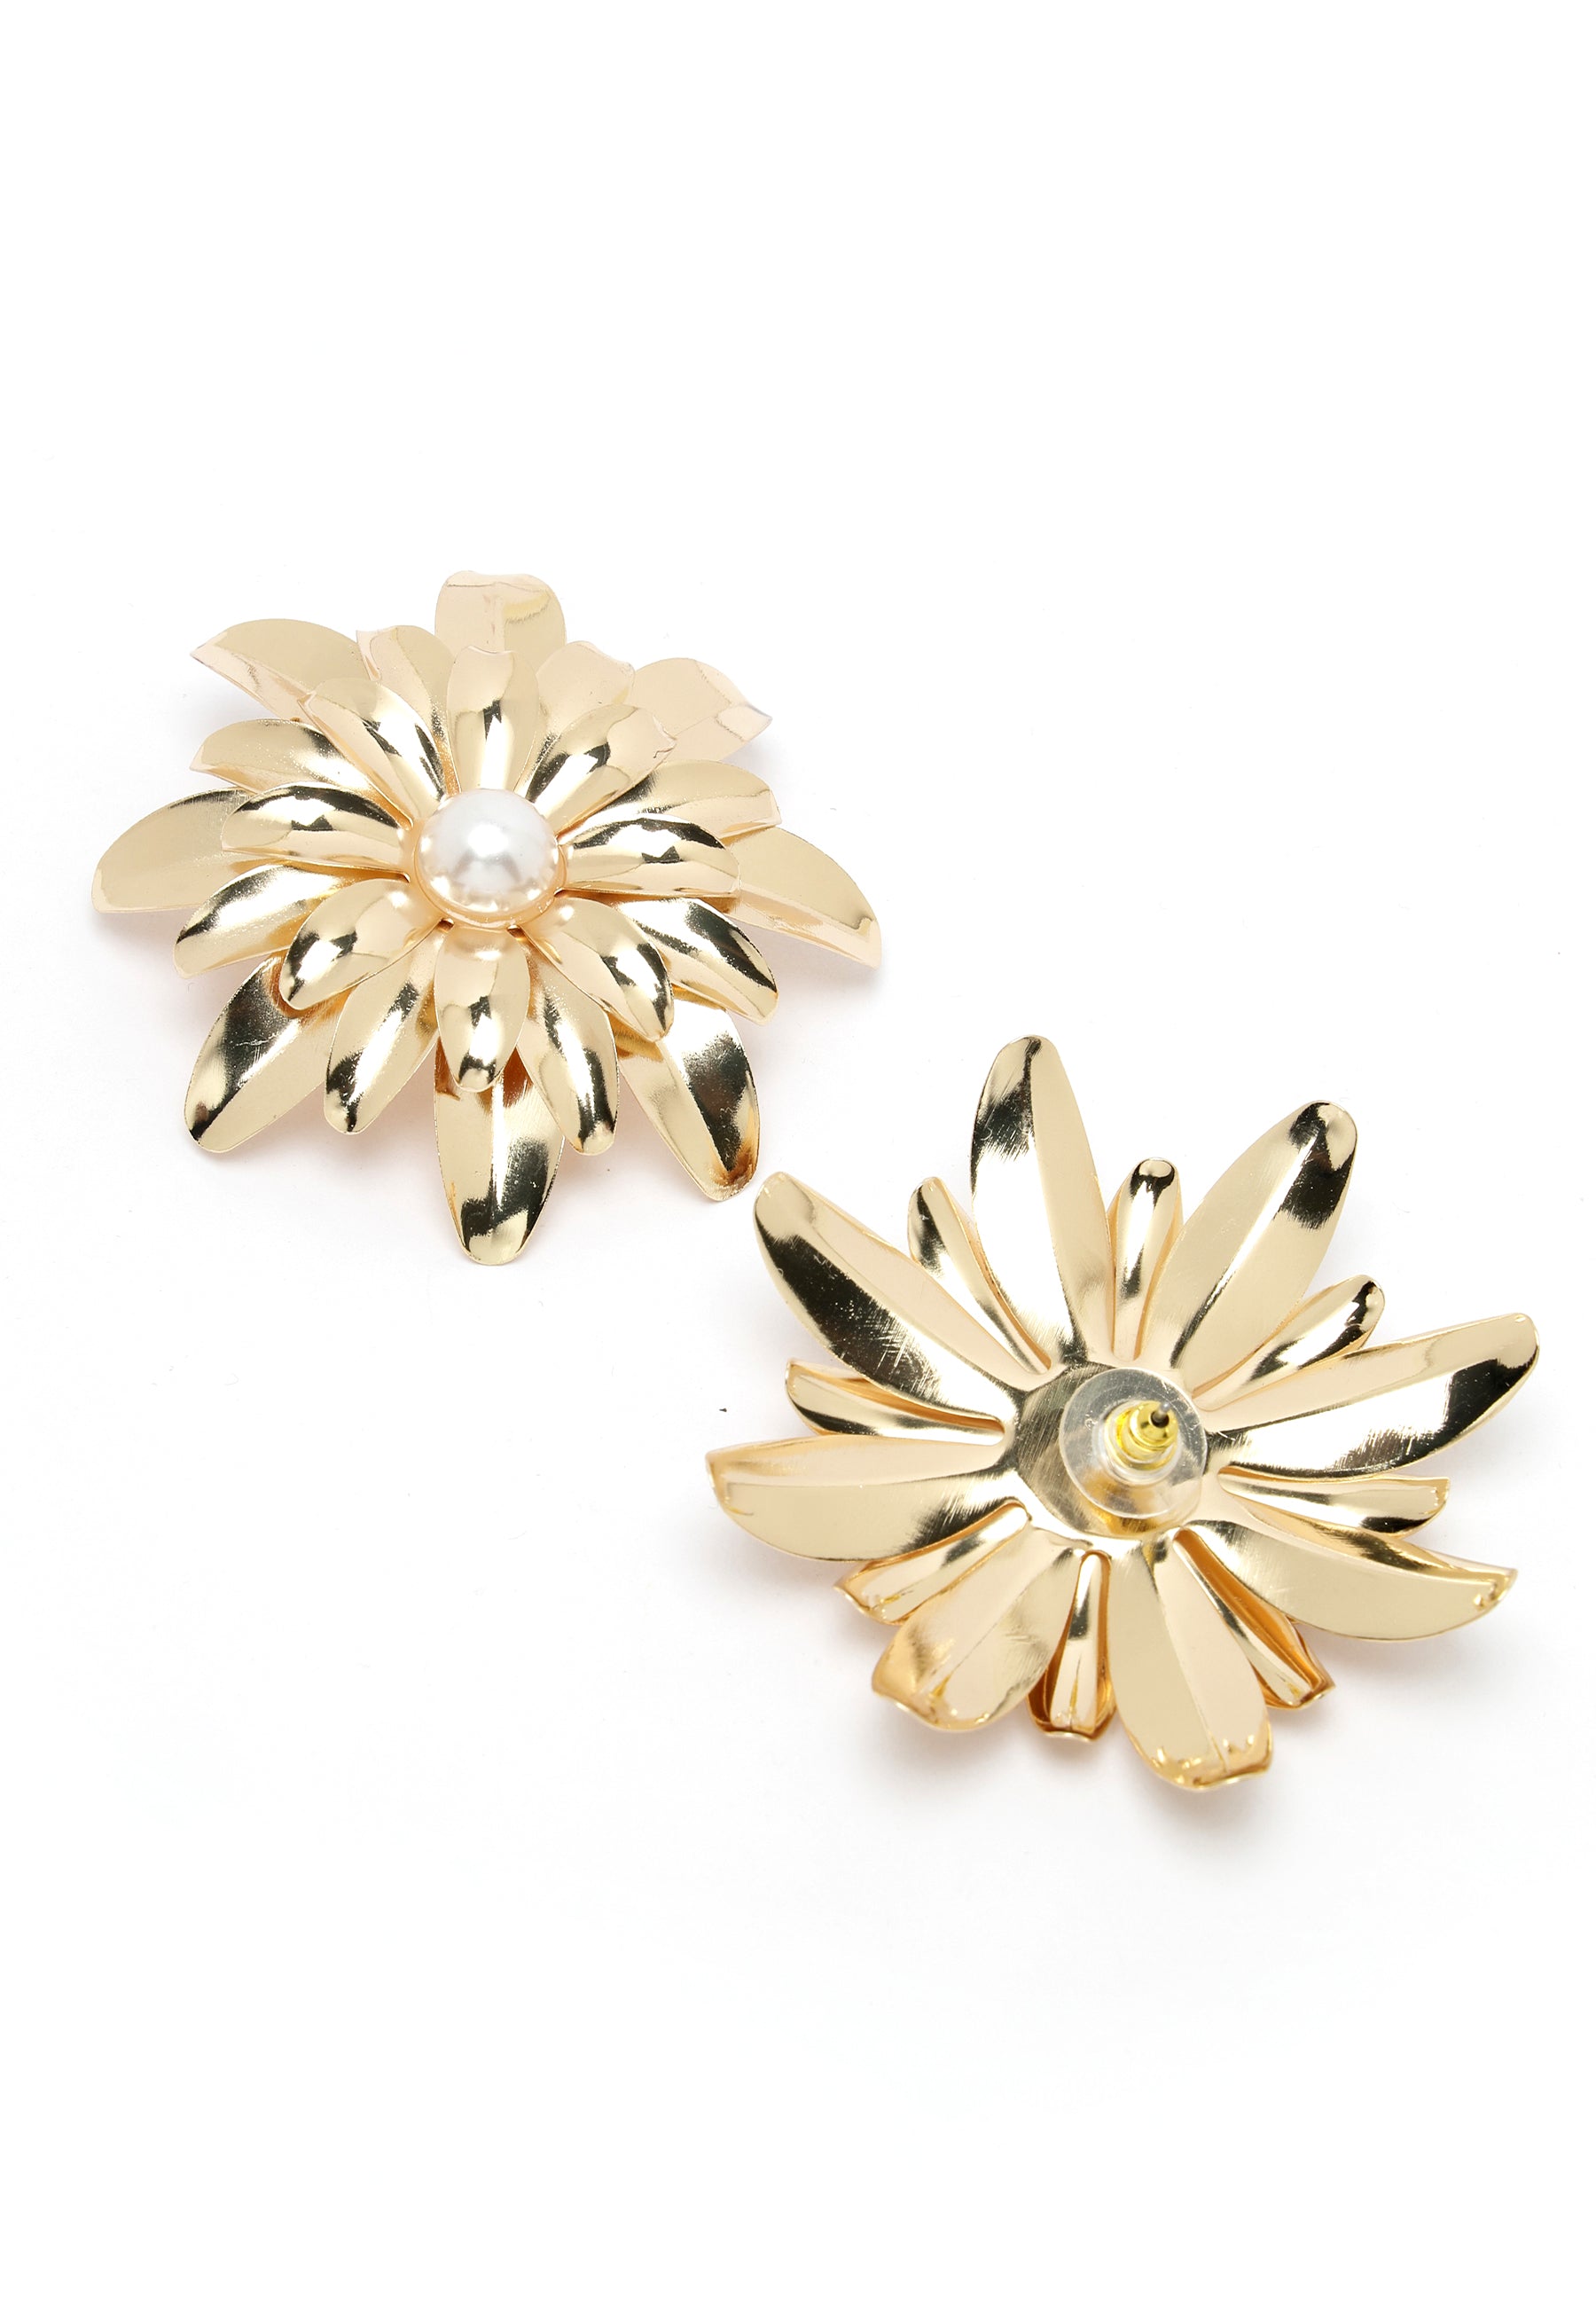 Gold-Colored Floral Stud Earrings